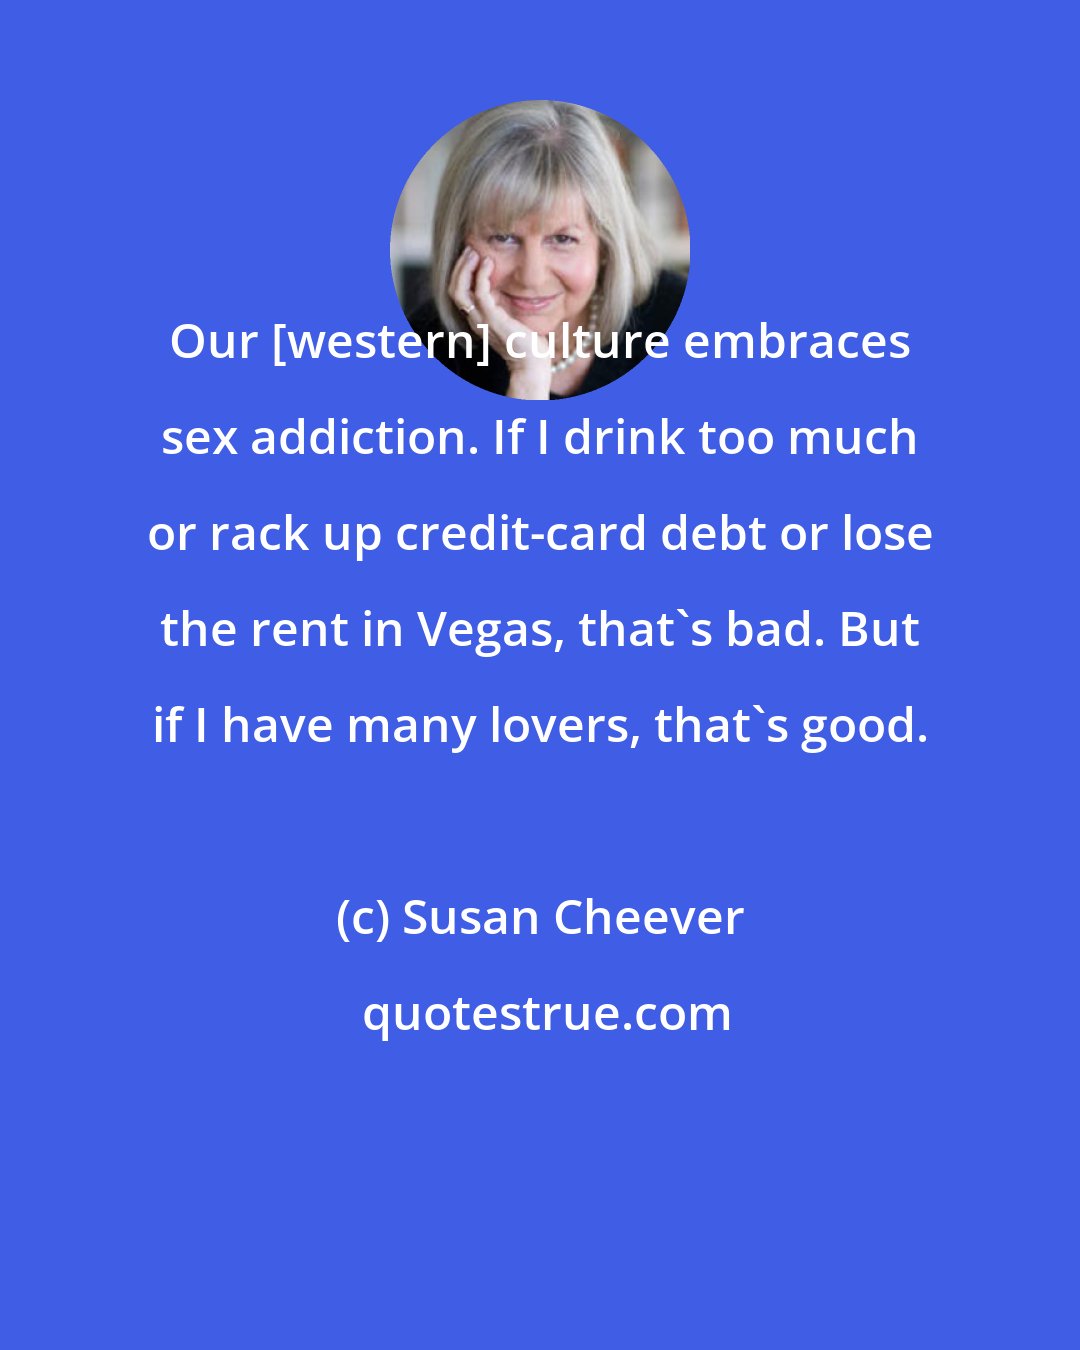 Susan Cheever: Our [western] culture embraces sex addiction. If I drink too much or rack up credit-card debt or lose the rent in Vegas, that's bad. But if I have many lovers, that's good.